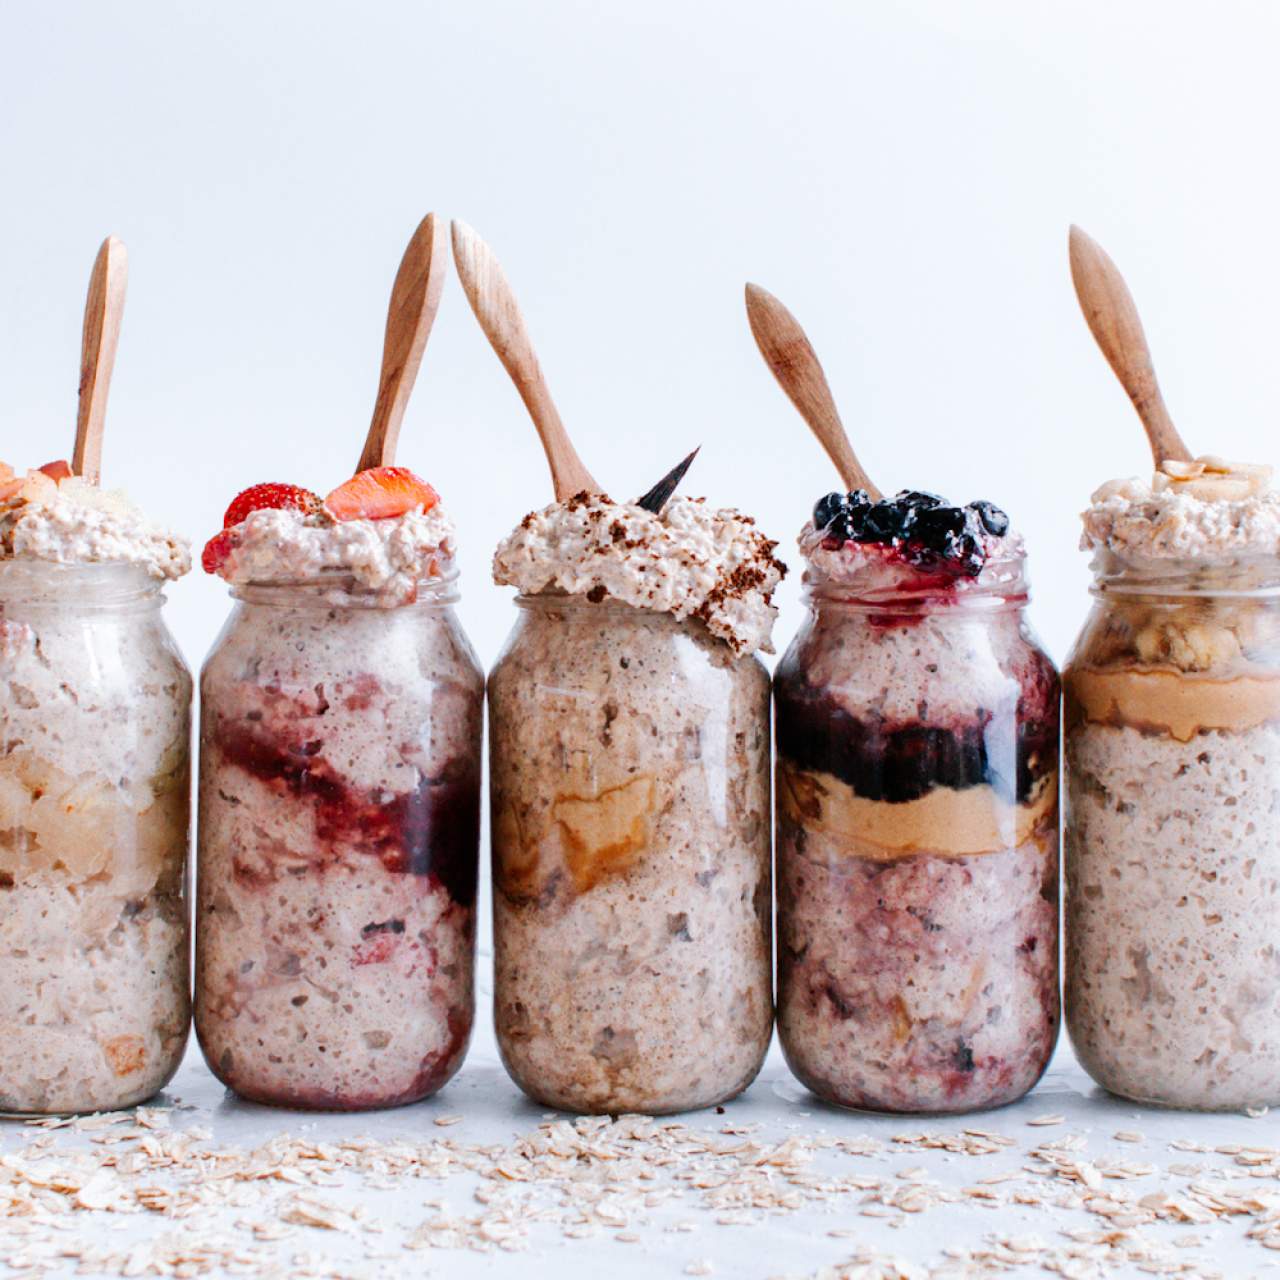 https://www.slenderkitchen.com/sites/default/files/styles/gsd-1x1/public/recipe_images/how-to-make-overnight-oats-1.jpg